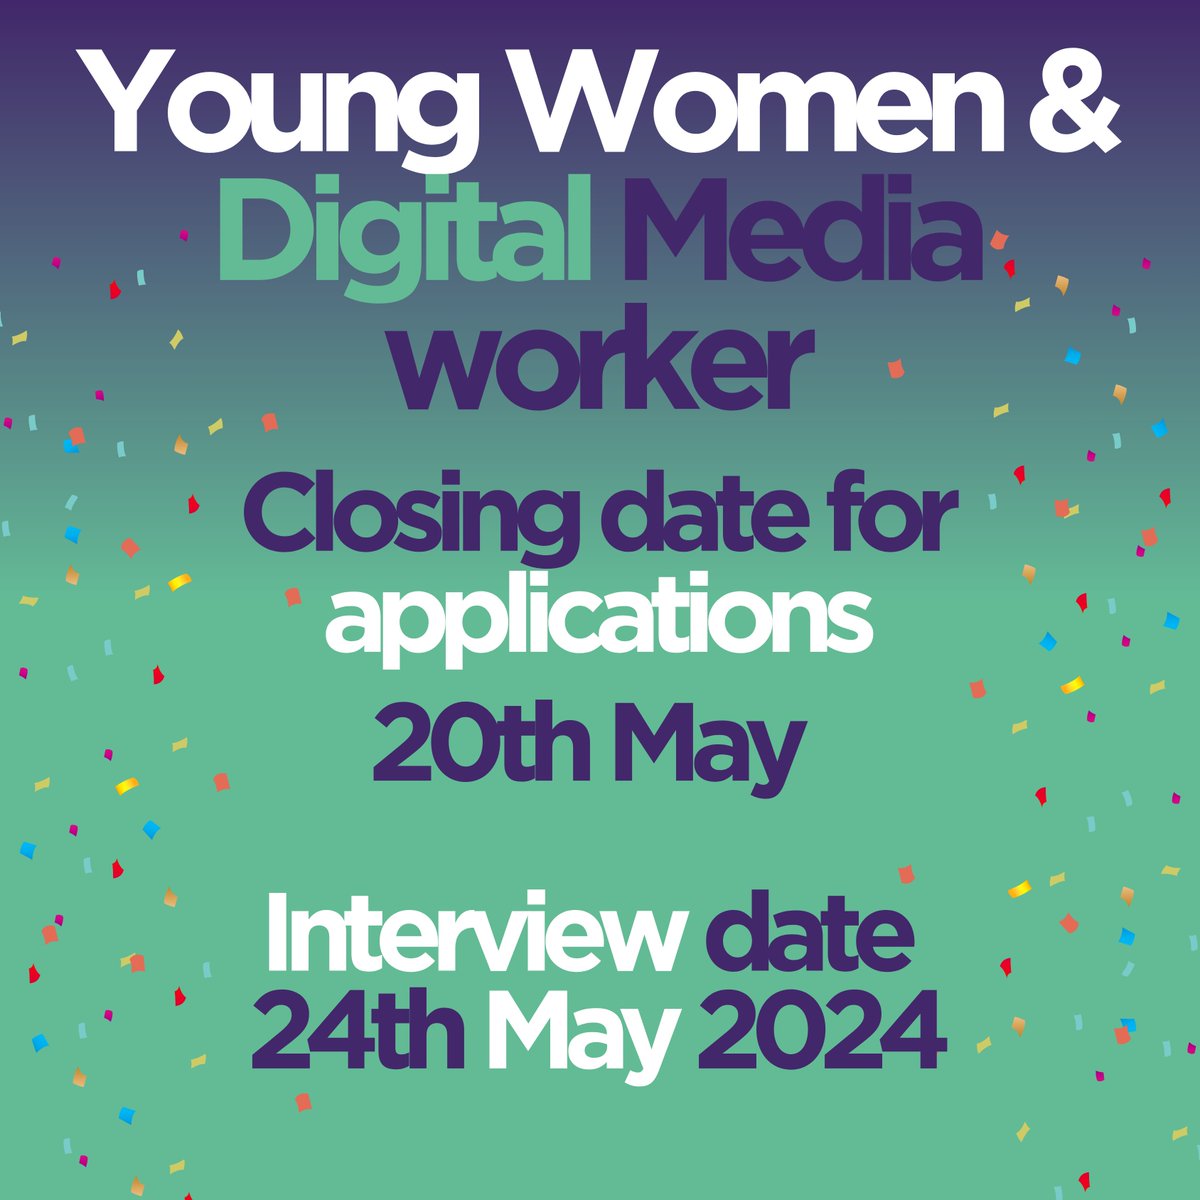 Looking for a change in pace? We are seeking a passionate and creative Young women and Digital Media Coordinator! Read more: getawaygirls.co.uk/vacancies/ #Career #OpportunityKnocks #Leeds #Youngwomen